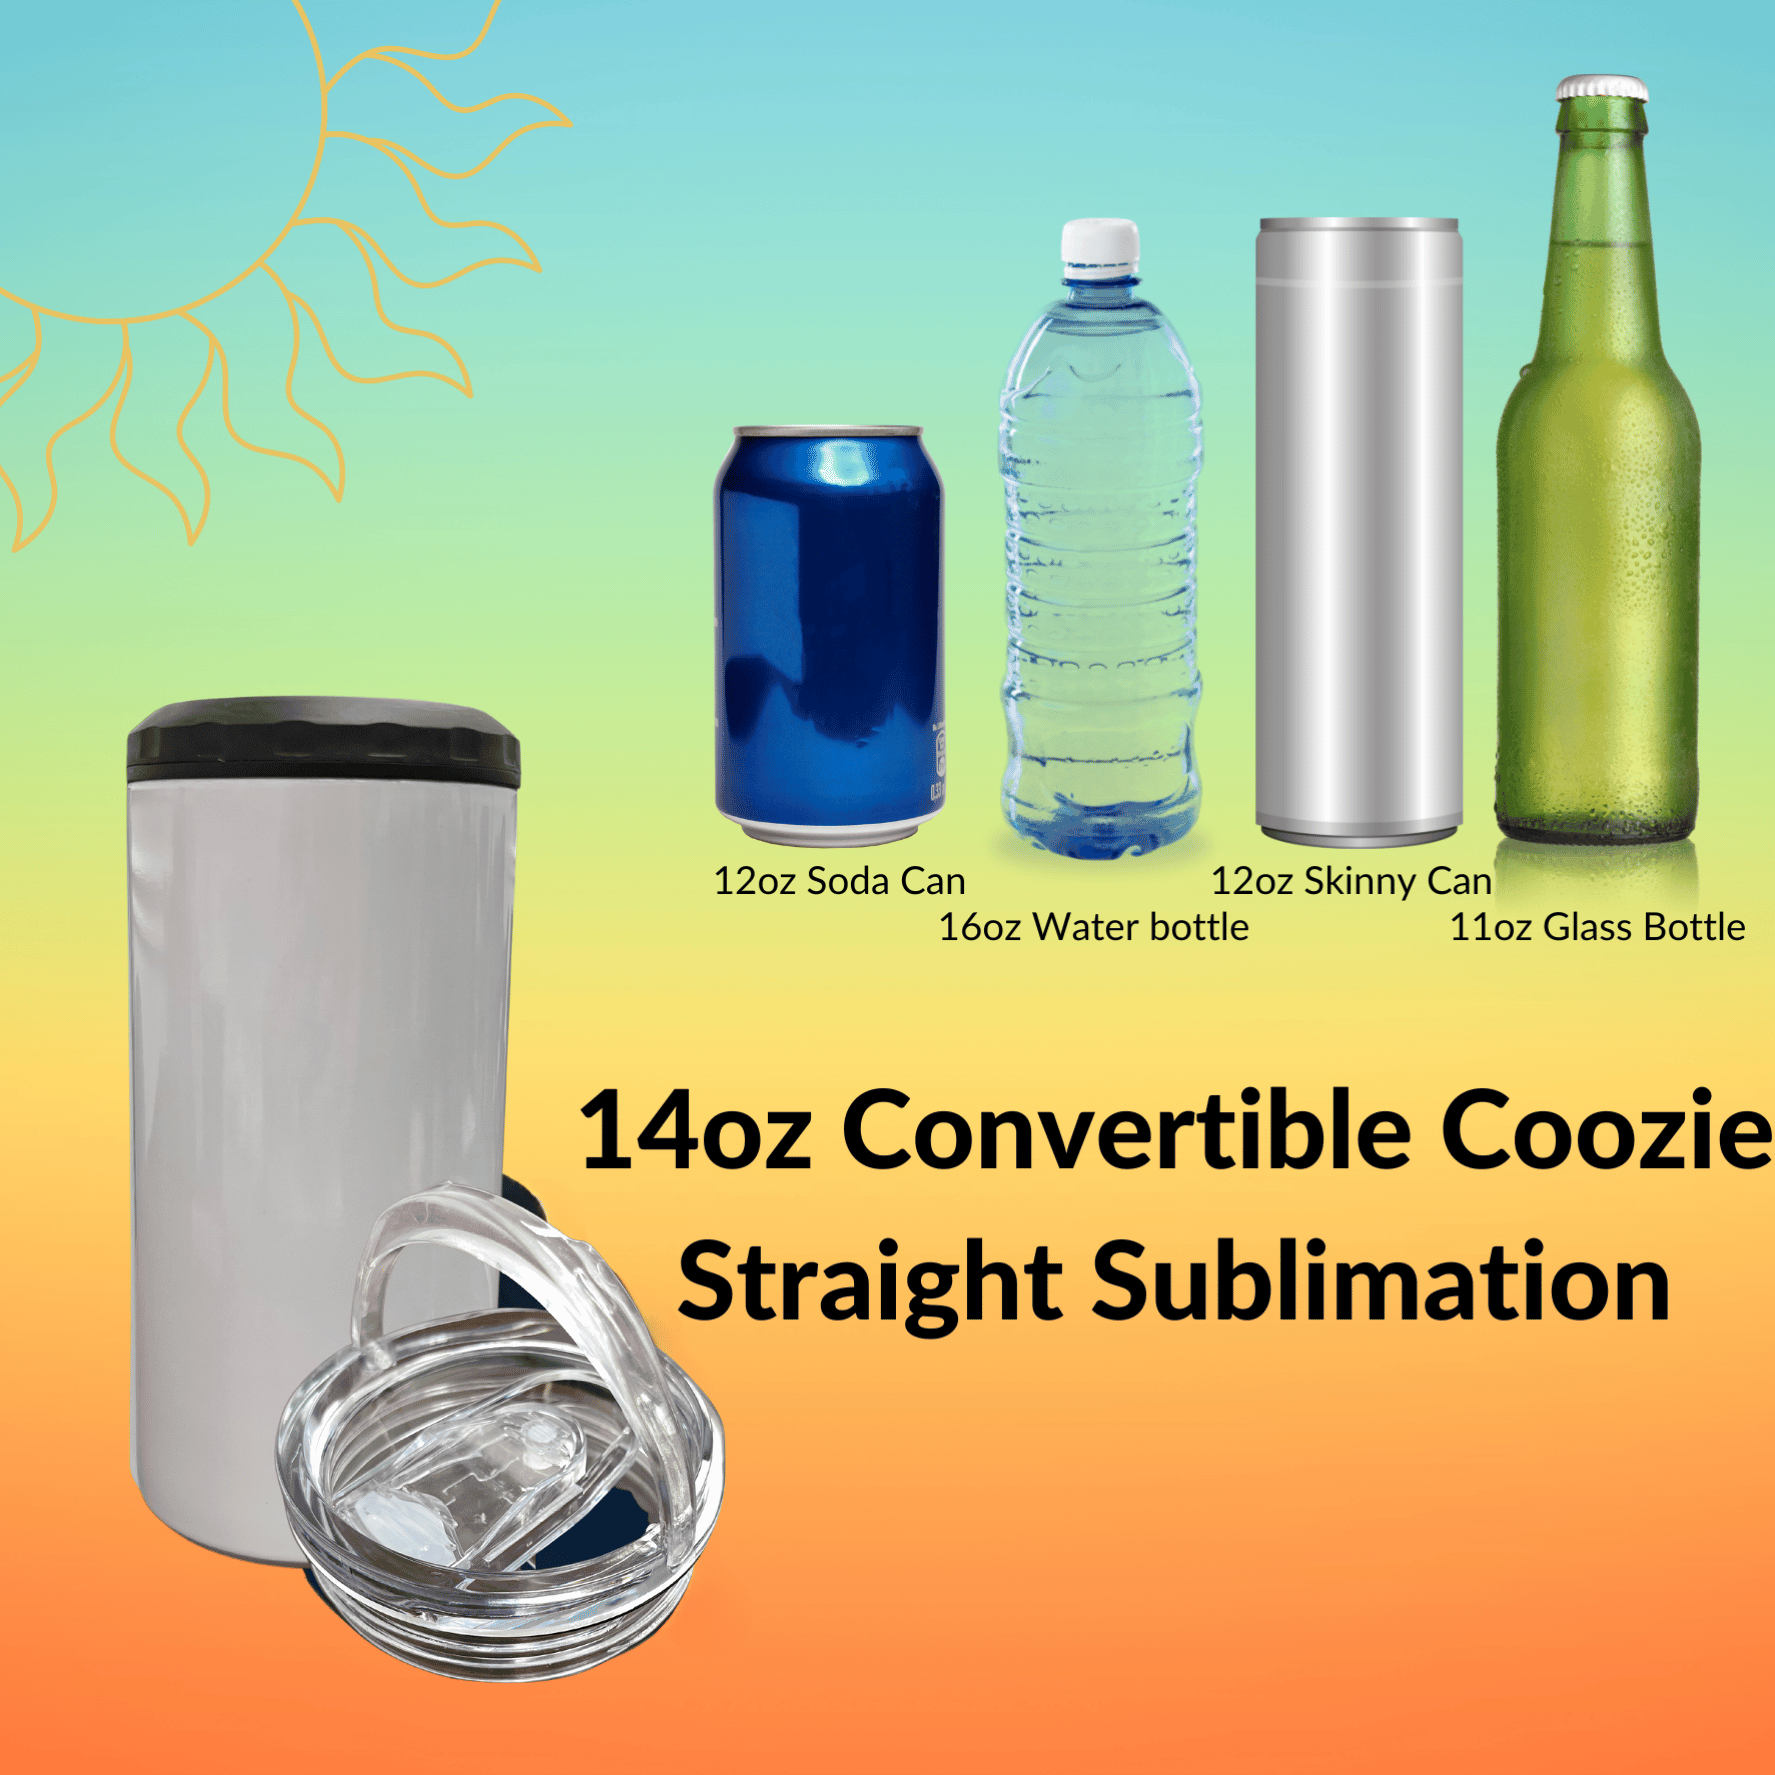 14oz Convertible Coozie Straight Sublimation Tumbler